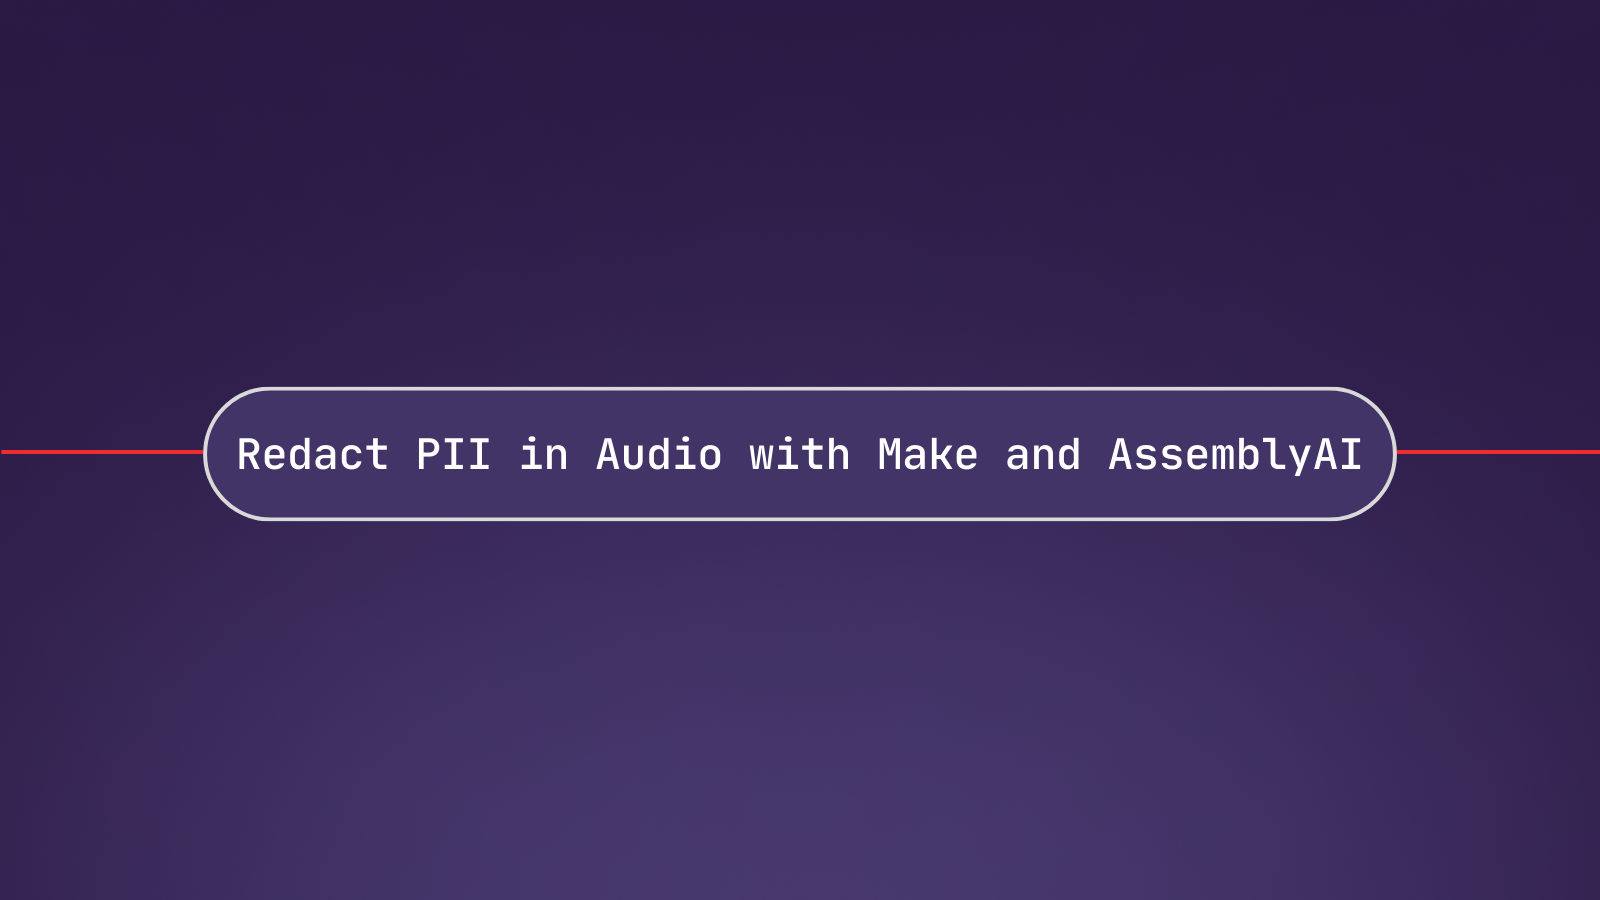 Redact PII in Audio with Make and AssemblyAI